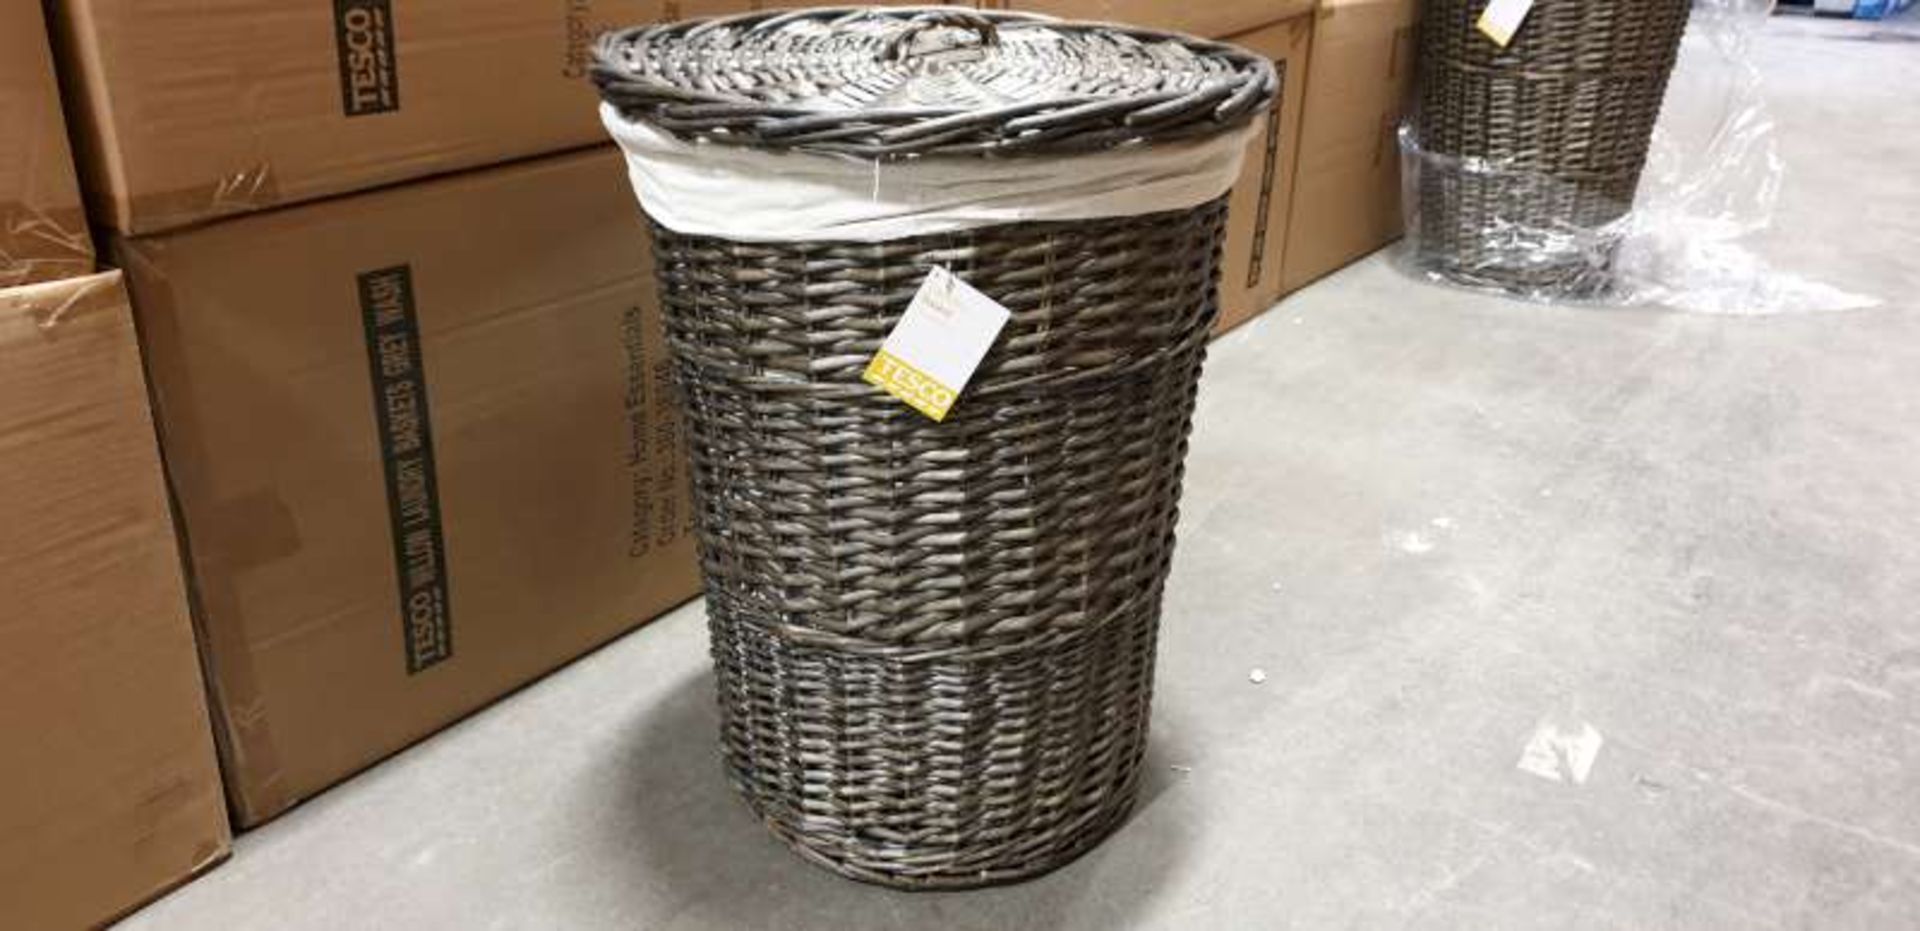 10 X BRAND NEW GREY WASH WILLOW LAUNDRY BASKET IN 5 BOXES